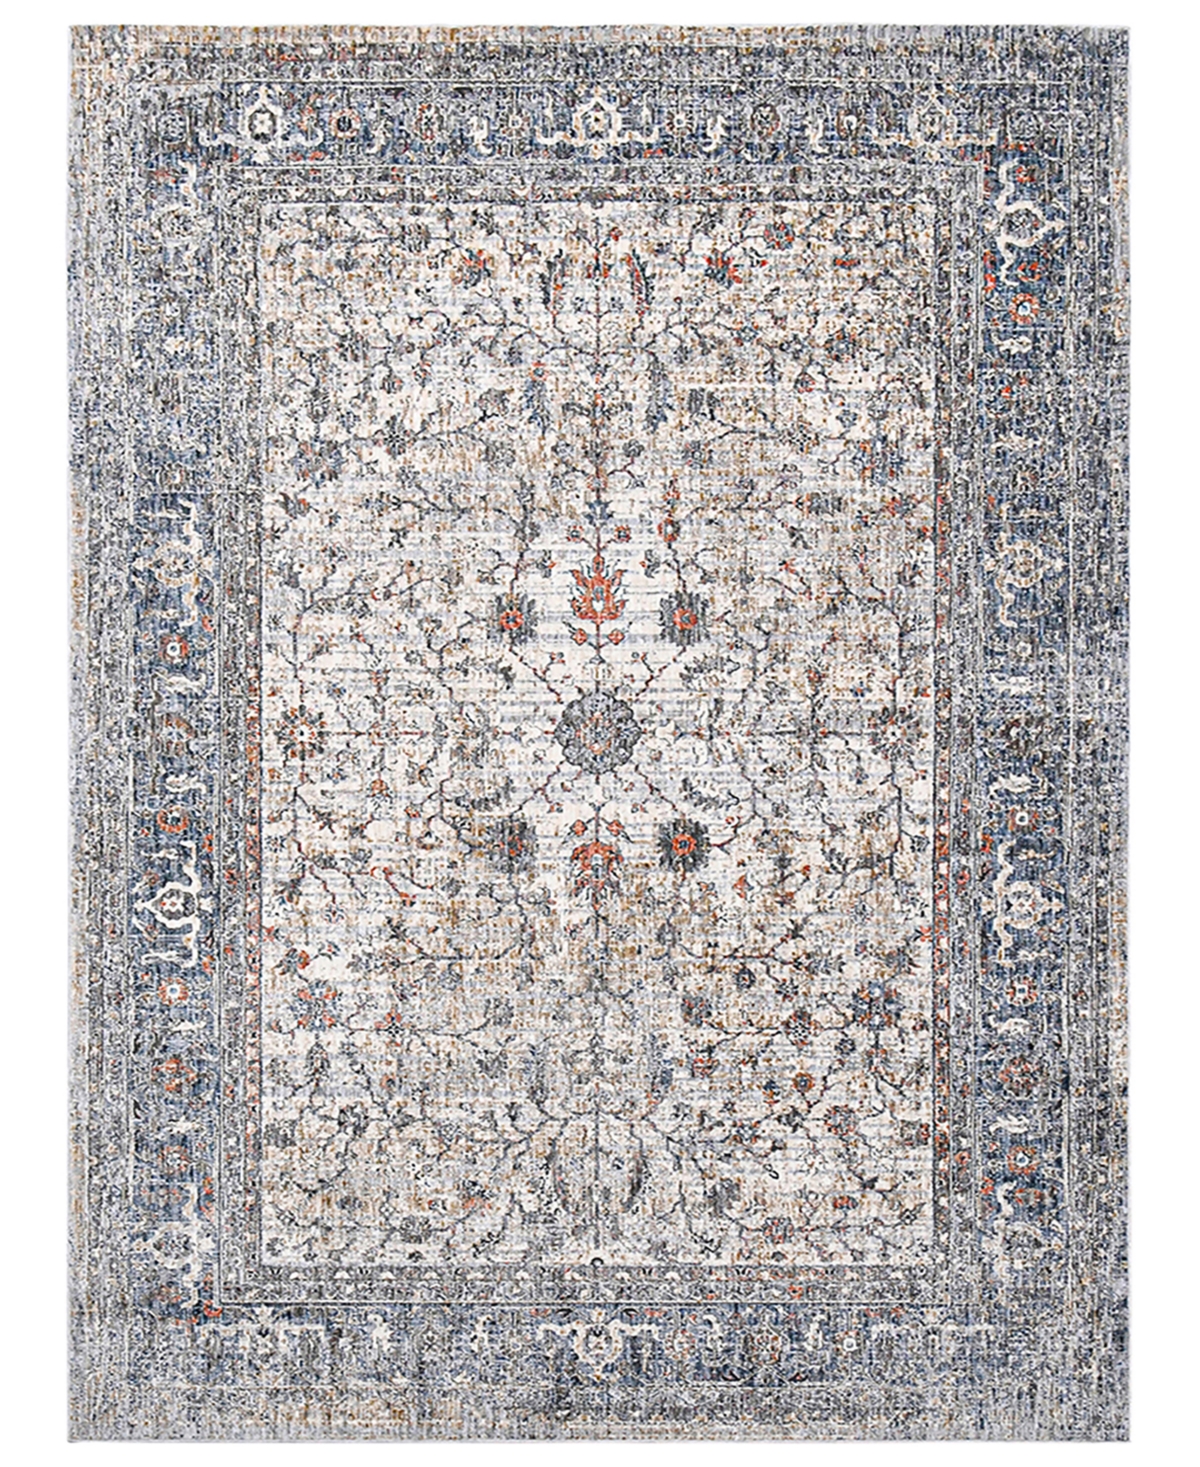 Amer Rugs Vermont Glidel 7'10" X 9'10" Area Rug In Ivory,gray